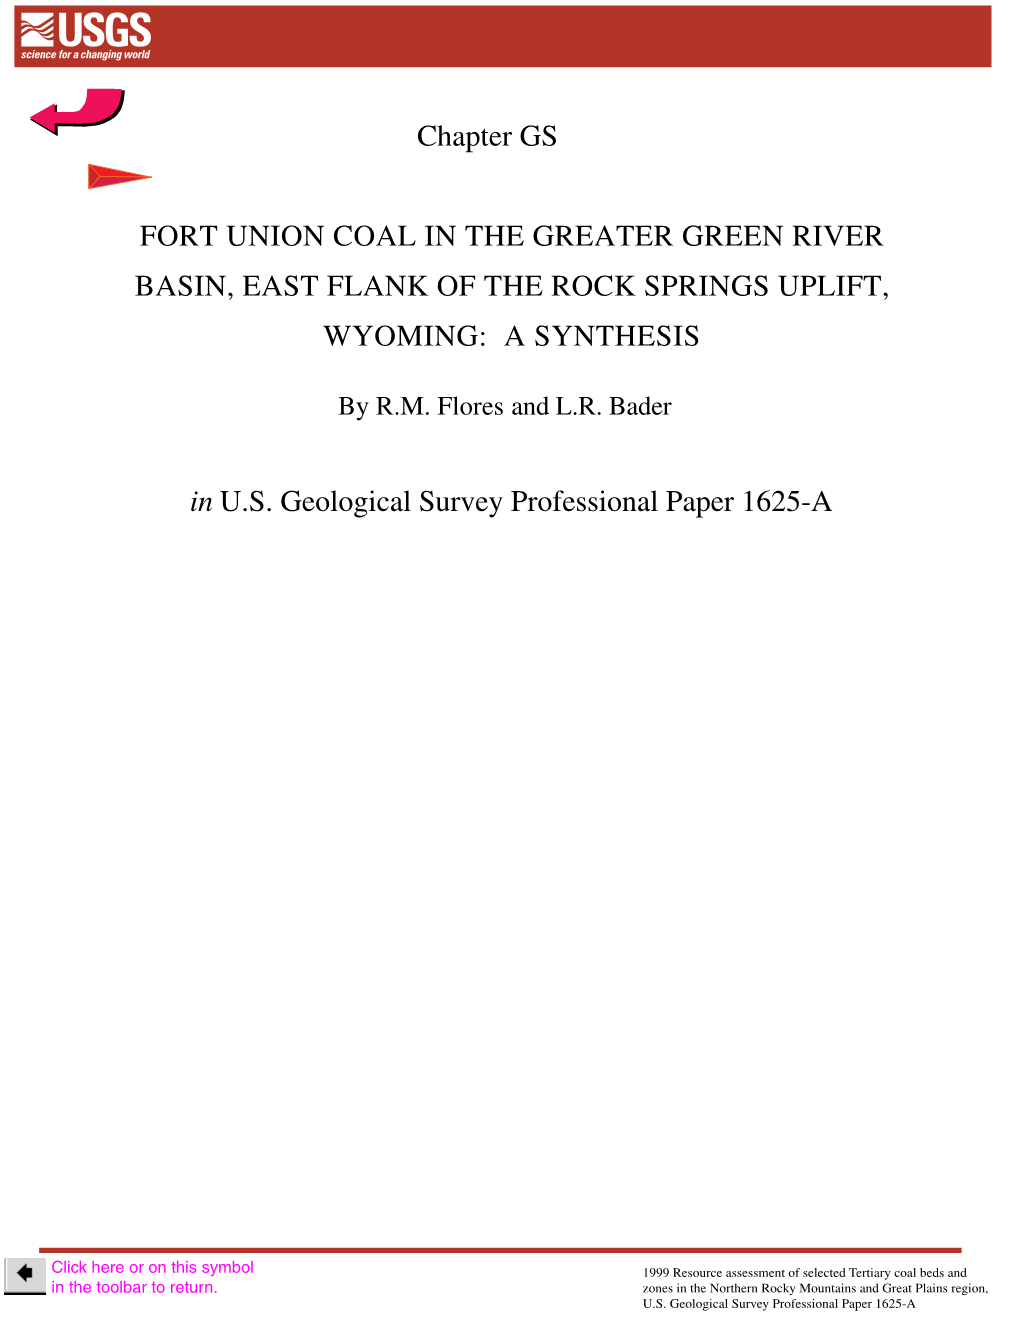 Chapter GS FORT UNION COAL in the GREATER GREEN RIVER BASIN, EAST FLANK of the ROCK SPRINGS UPLIFT, WYOMING